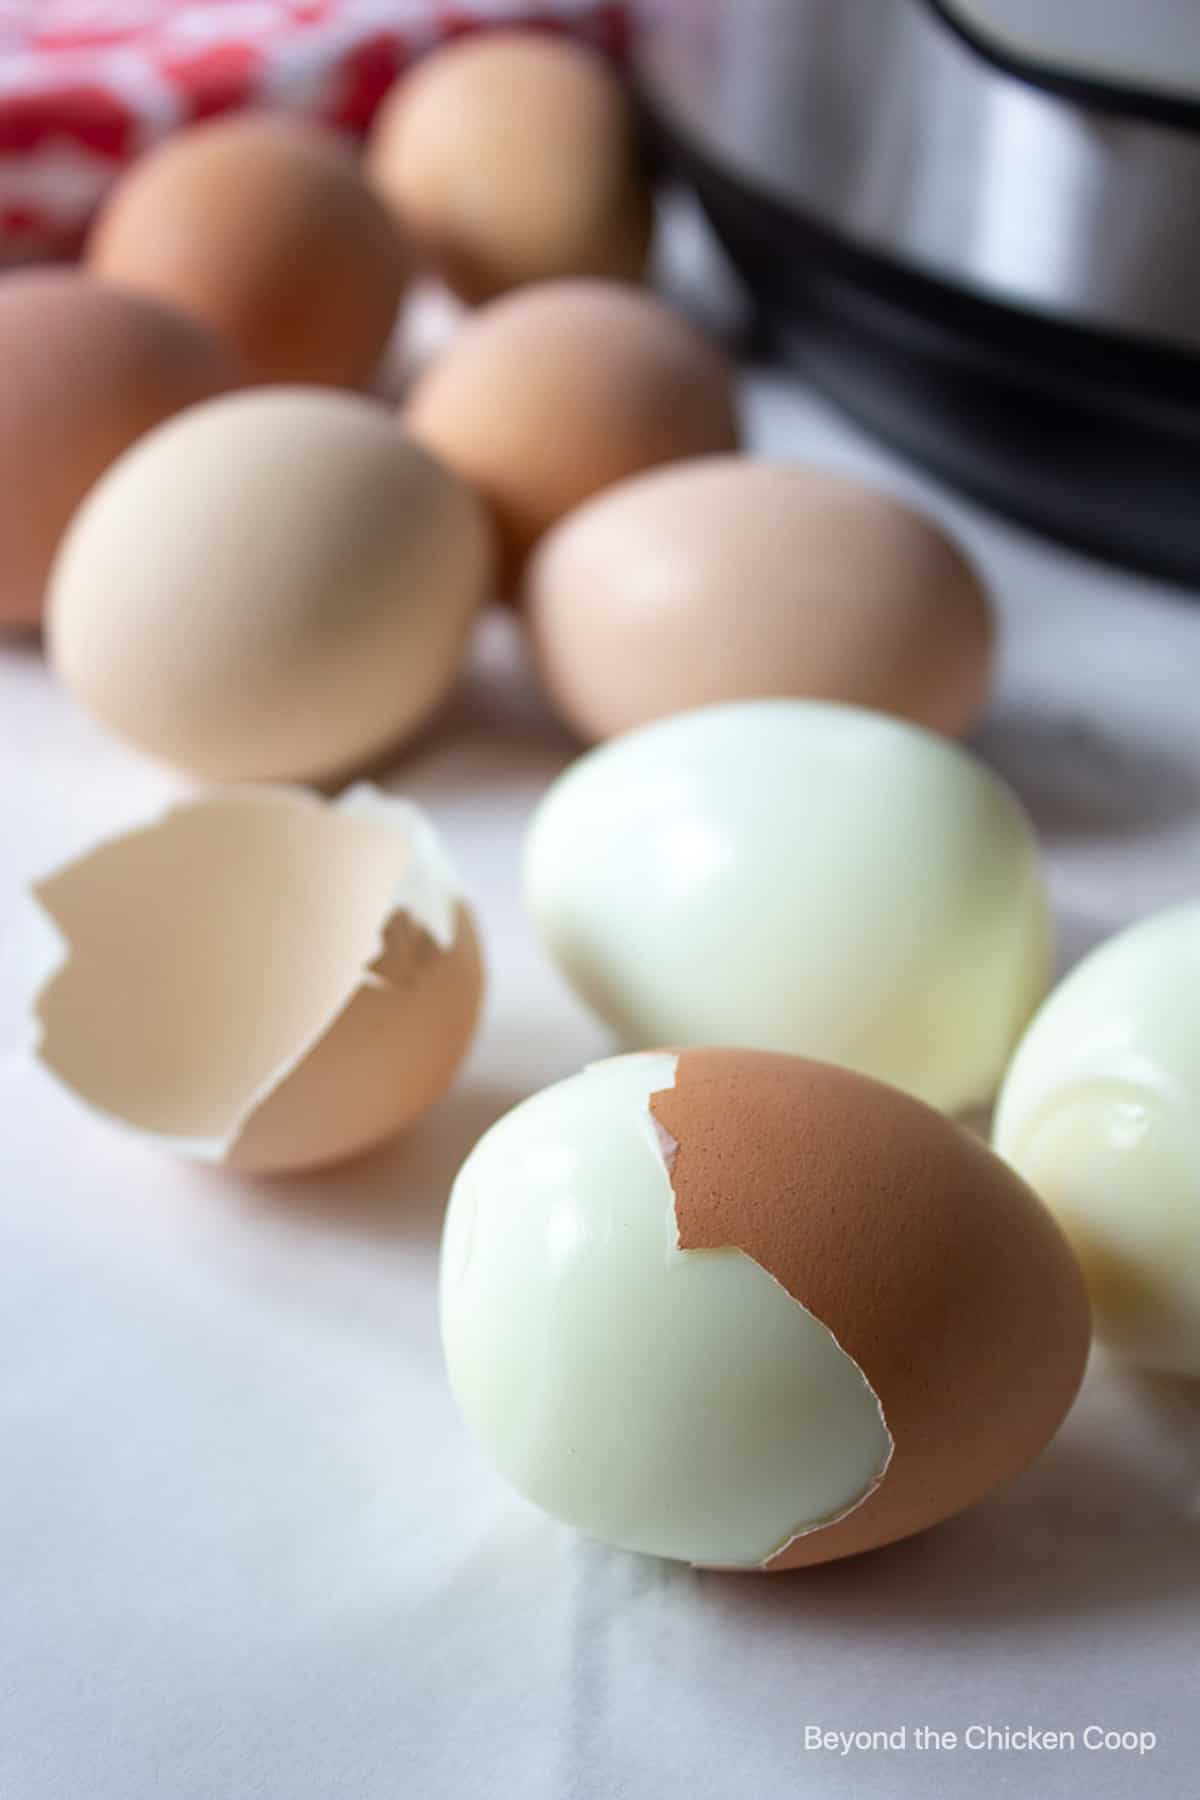 Hard boiled eggs with the peels off the eggs.